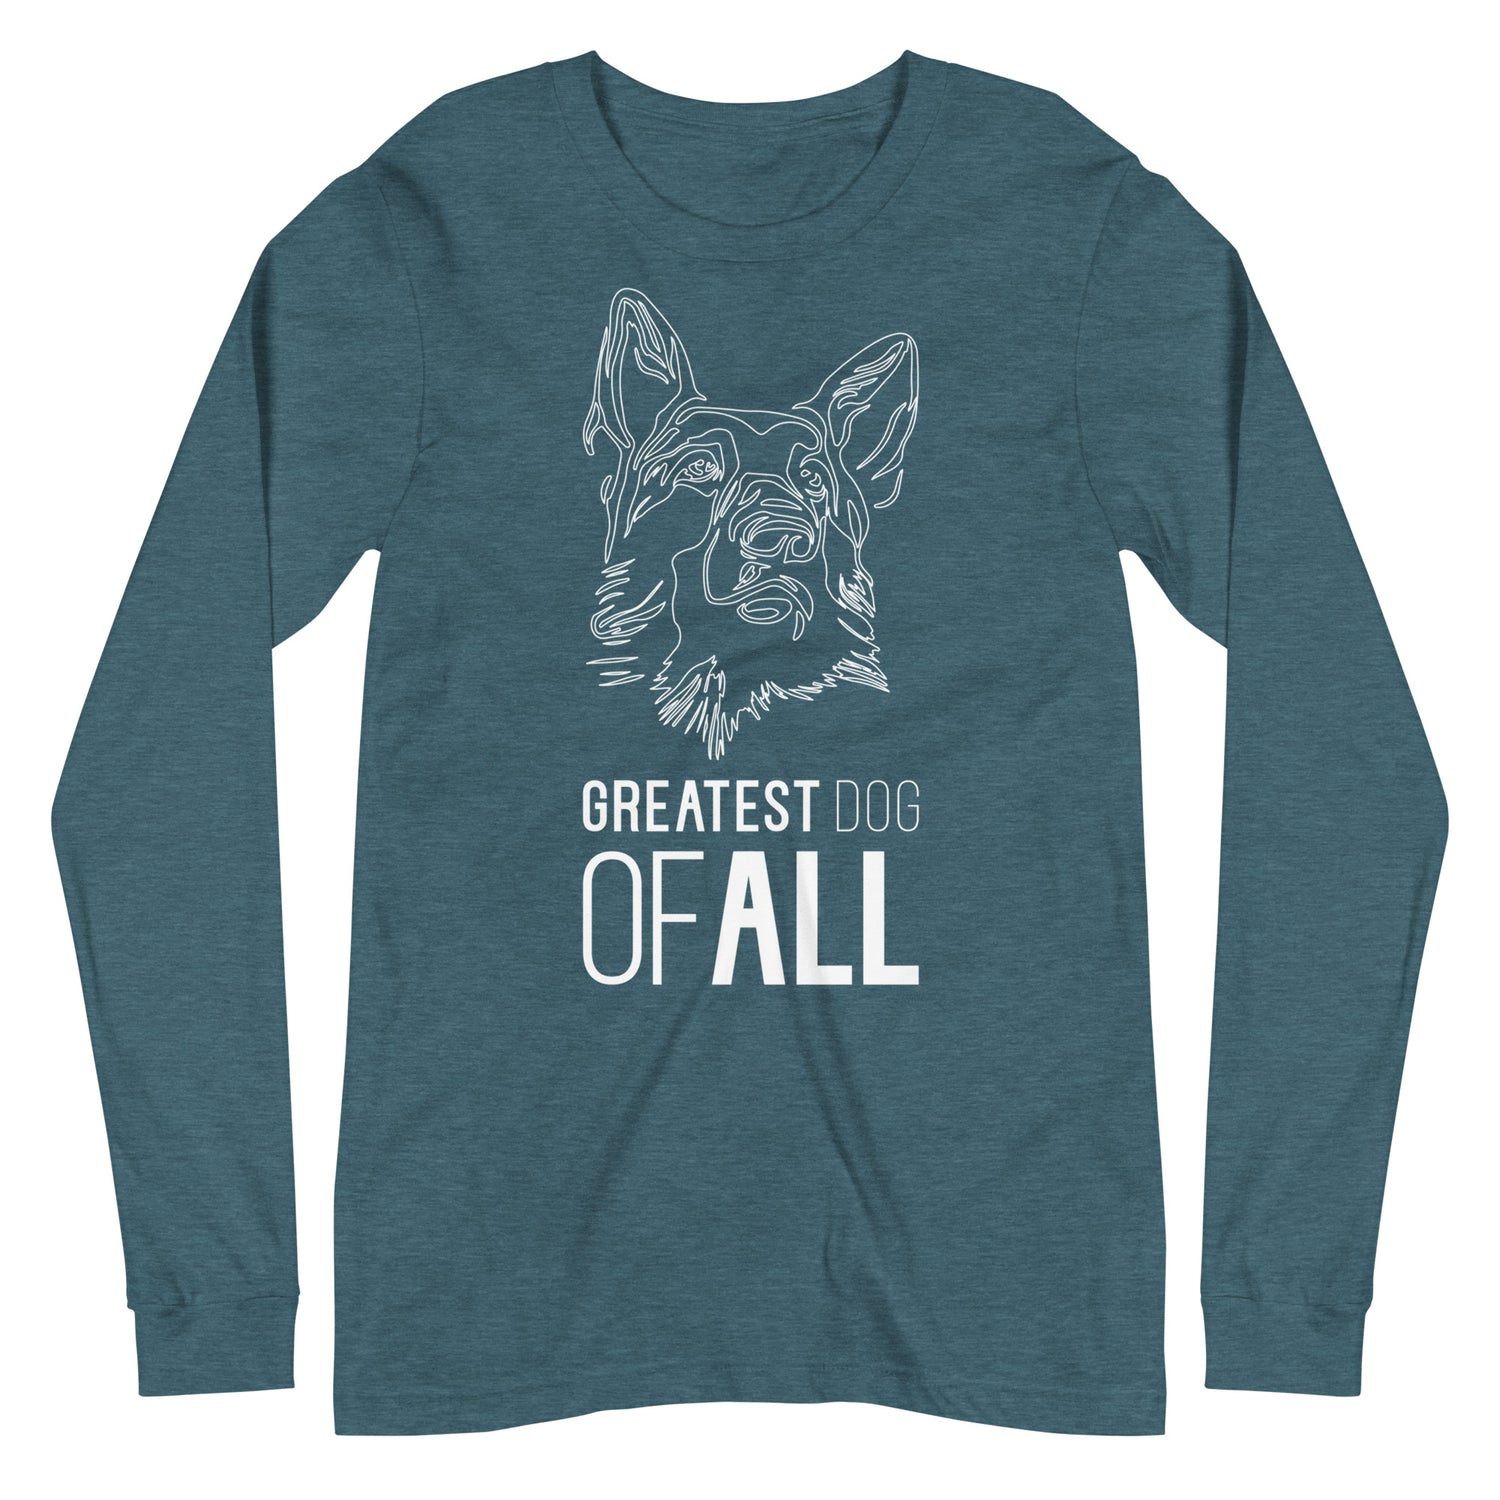 White line German Shepherd face with Greatest Dog of All caption on unisex heather deep teal long sleeve t-shirt